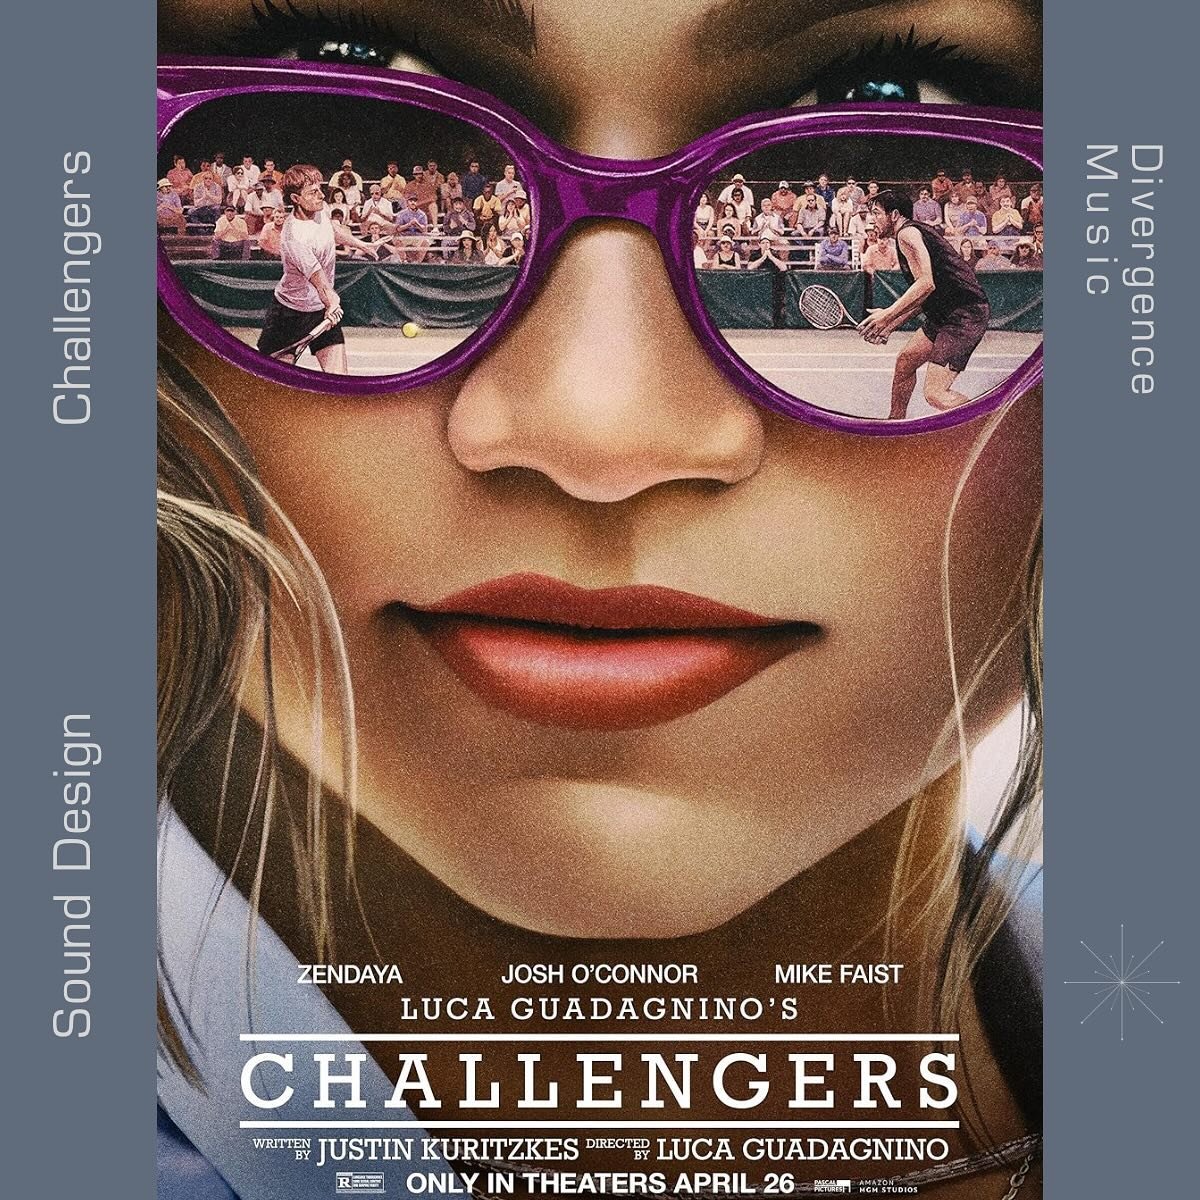 Excited for the Friday release of @challengersmovie to cap off a great campaign, which we were very proud to be a part of! You&rsquo;ll hear sound design from our Dvices series throughout.

Thanks to our friends at @amazonmgmstudios for bringing us o